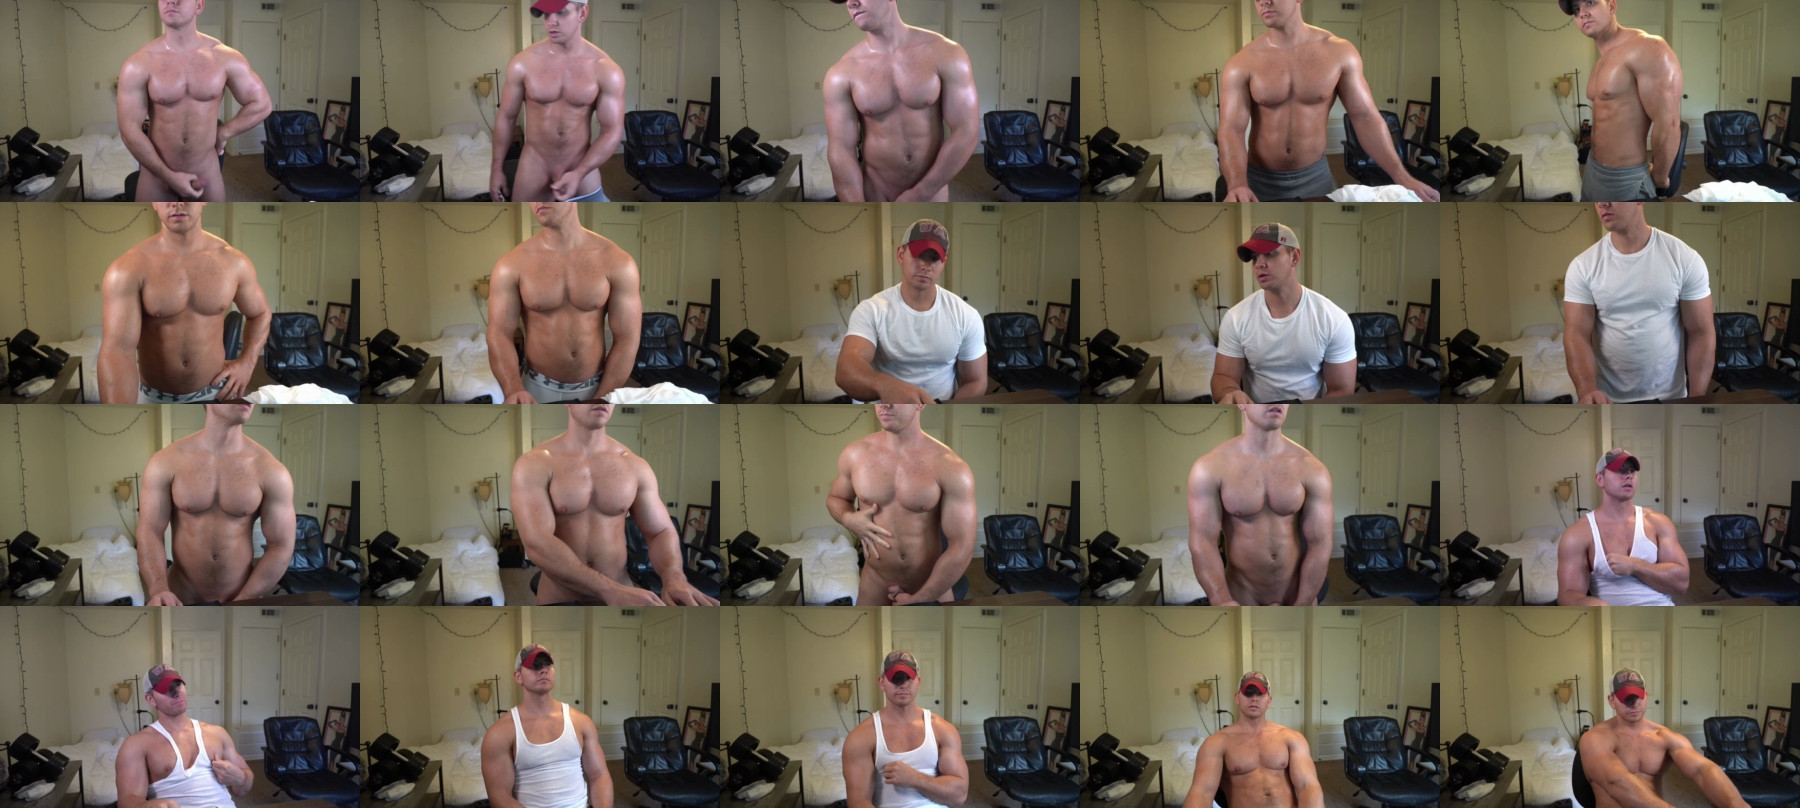 Hotmuscles6t9 Video CAM SHOW @ Chaturbate 07-05-2021